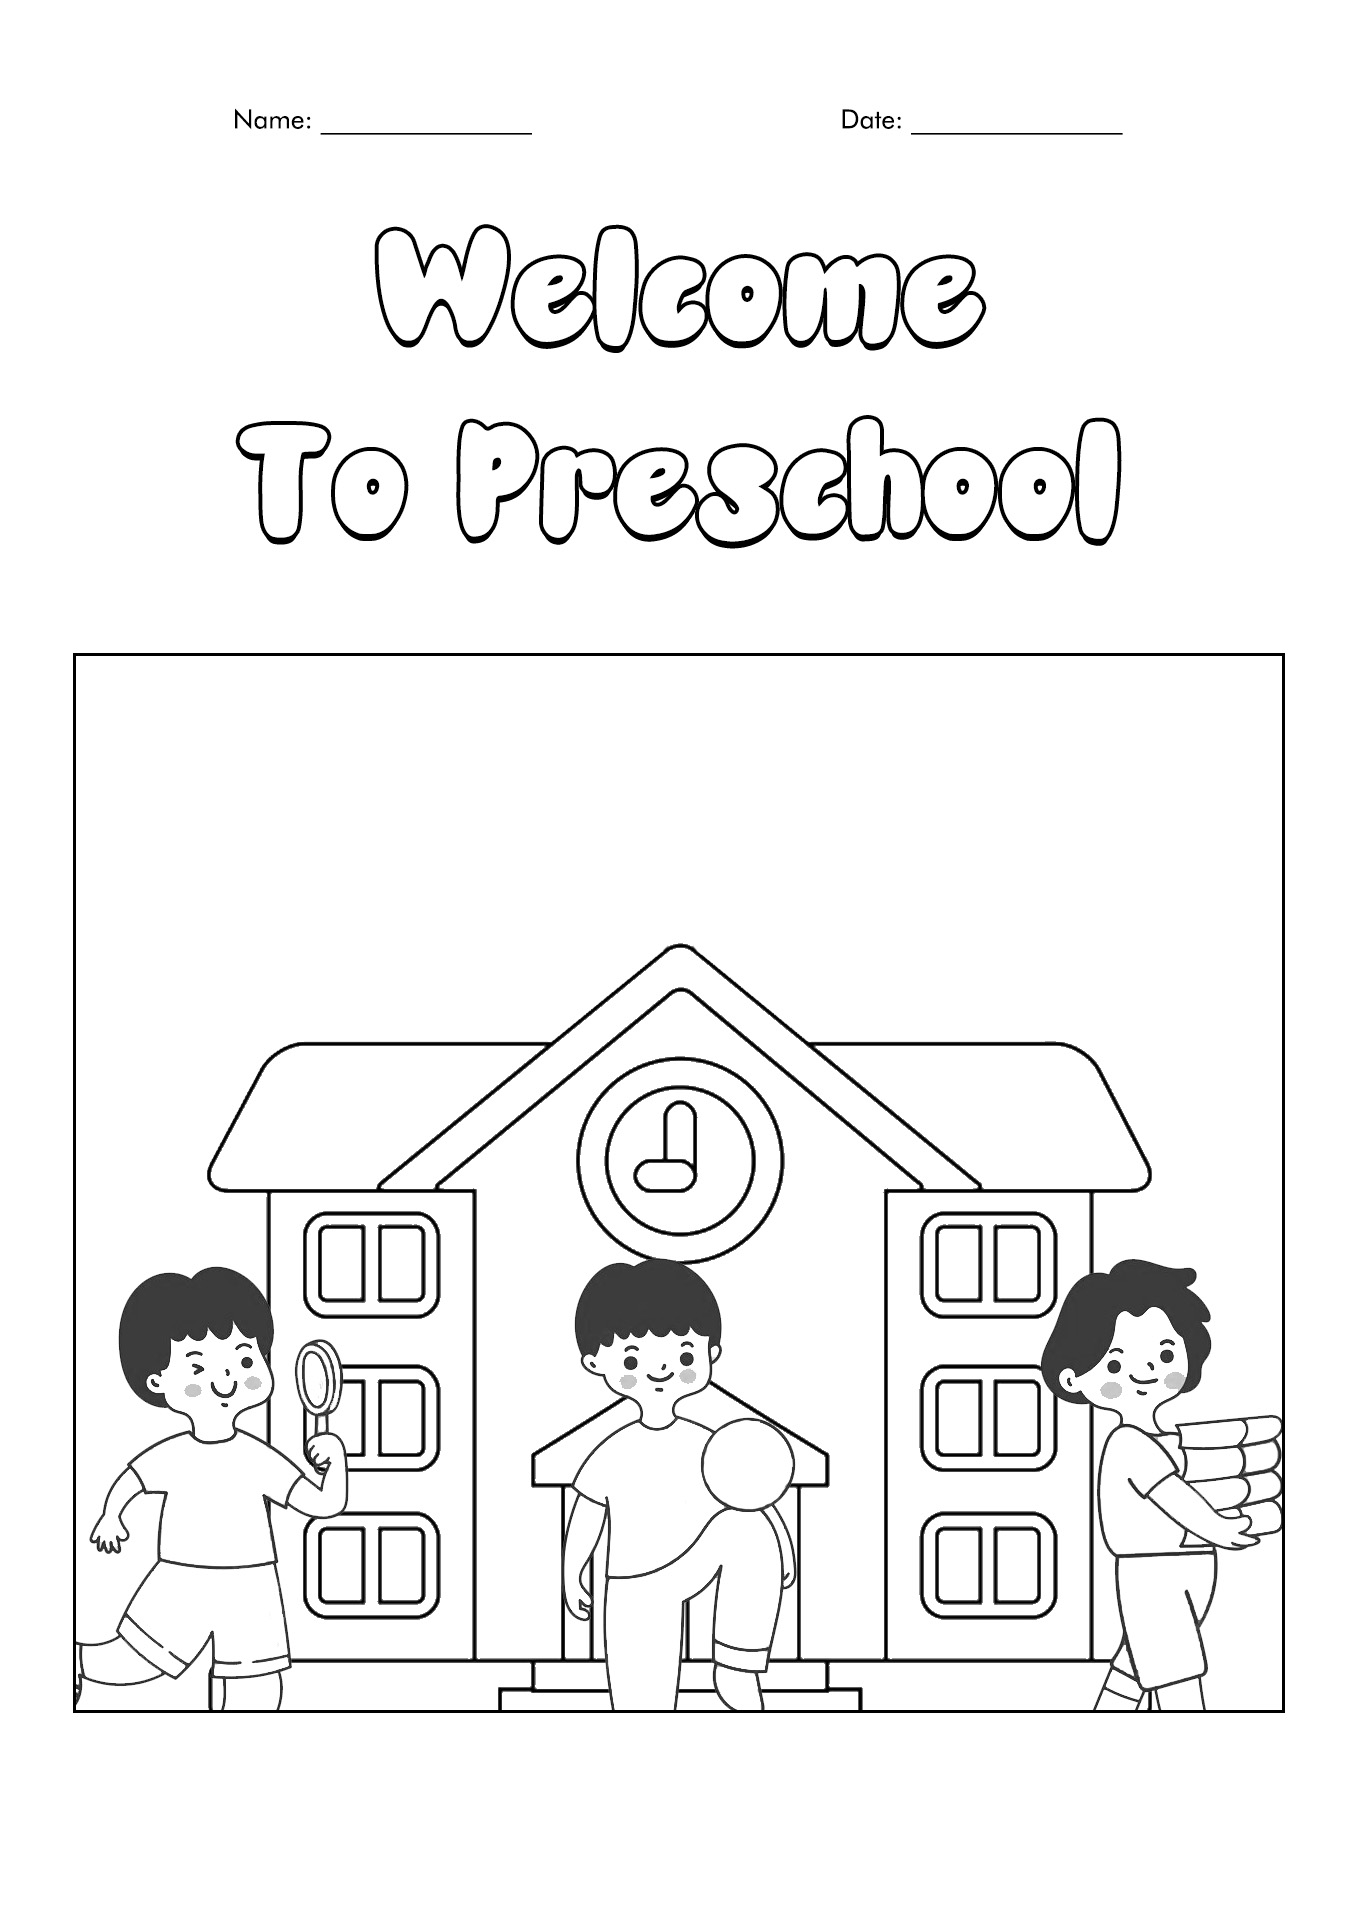 Welcome to Preschool Coloring Pages